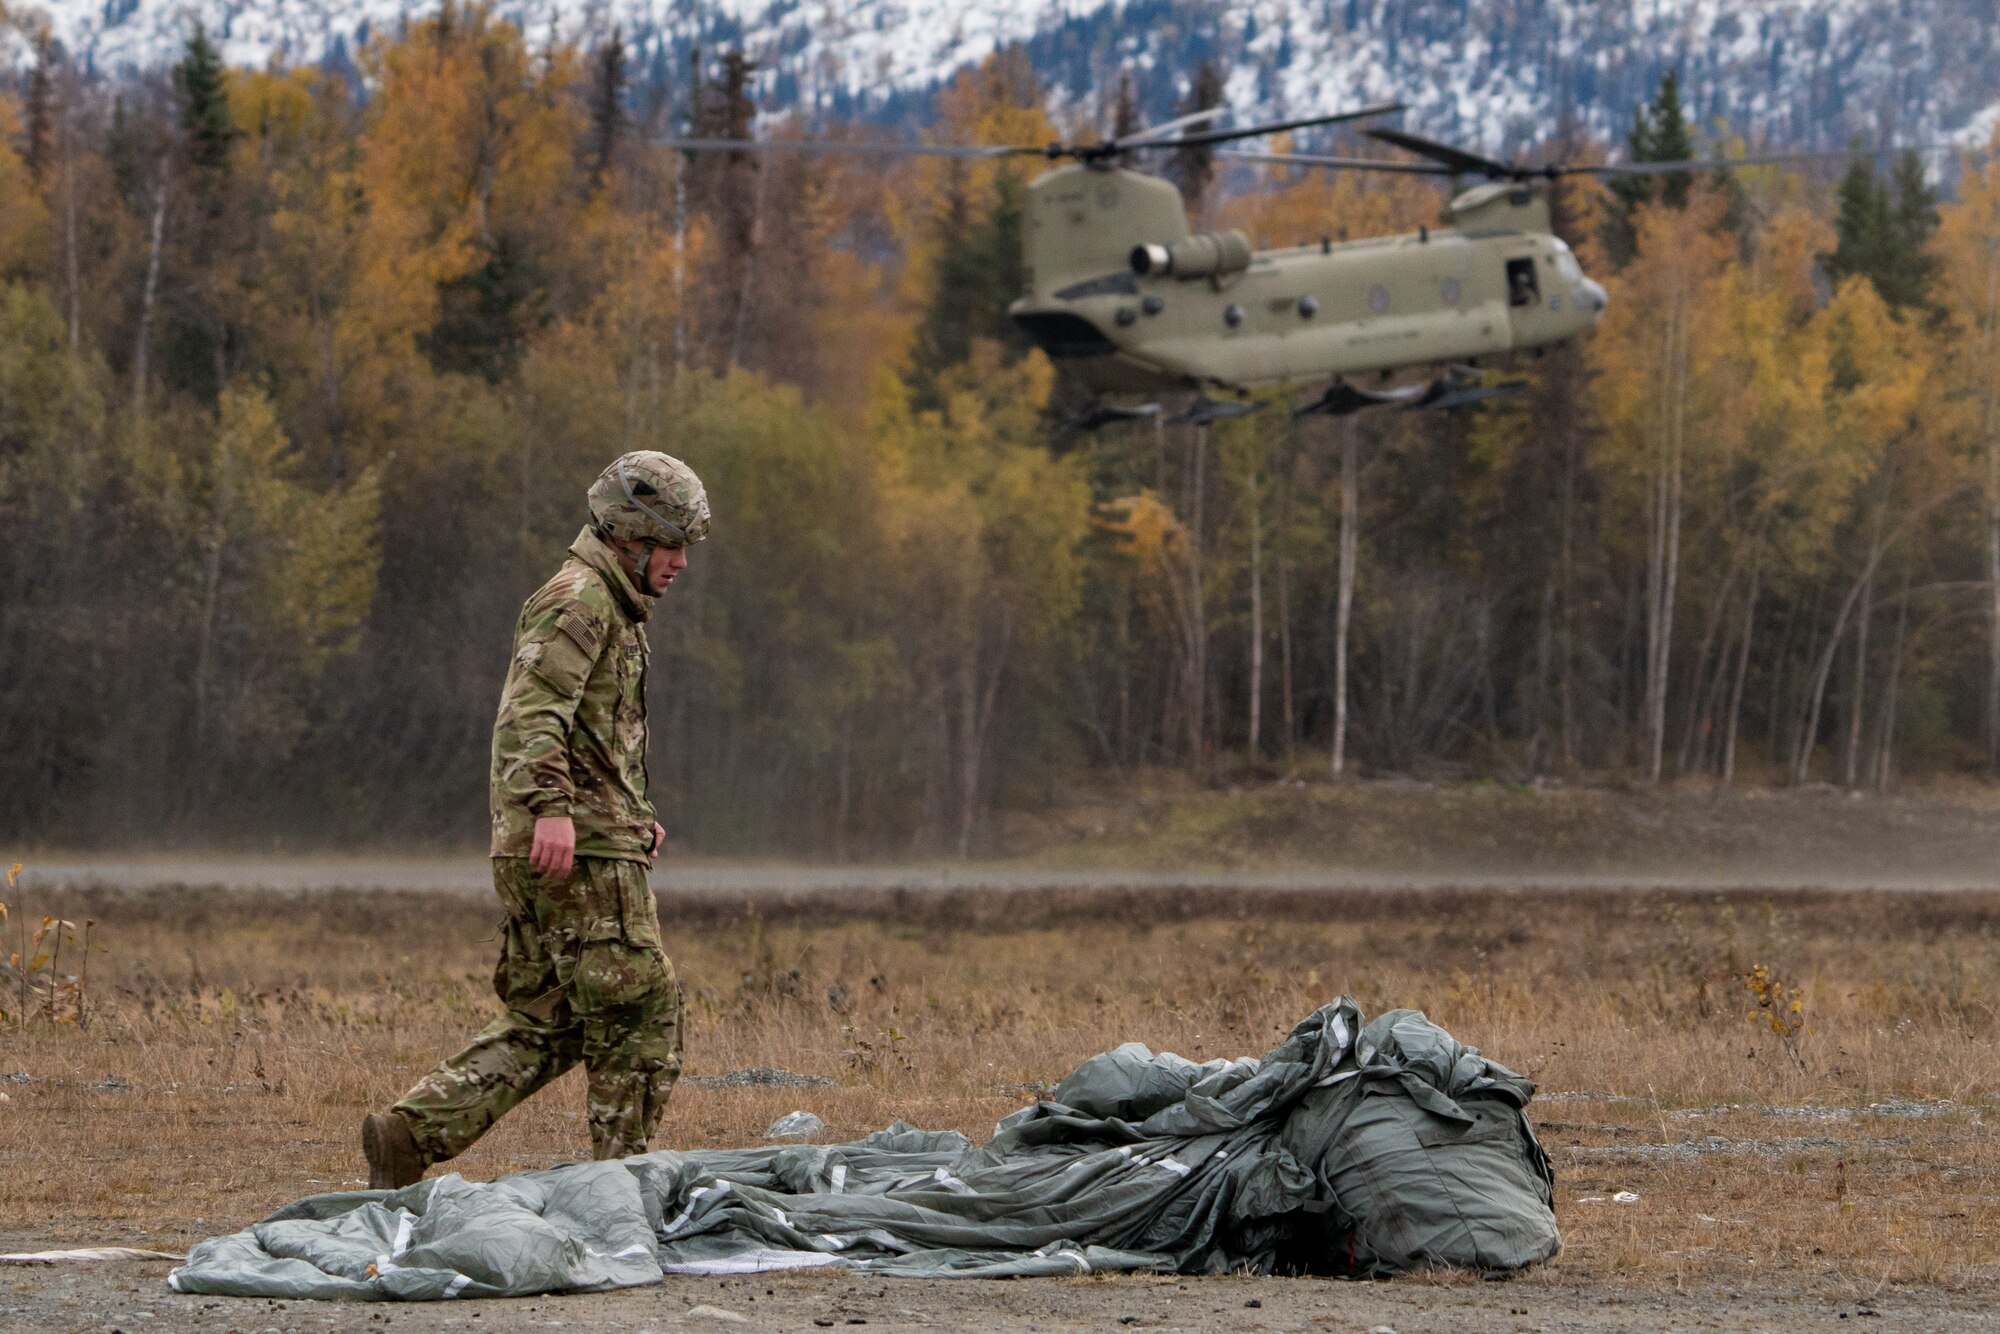 A U.S. Army paratrooper assigned to the 1st Squadron (Airborne), 40th Cavalry Regiment, 4th Infantry Brigade Combat Team (Airborne), 25th Infantry Division, U.S. Army Alaska, recovers his parachute after jumping from a CH-47 Chinook.